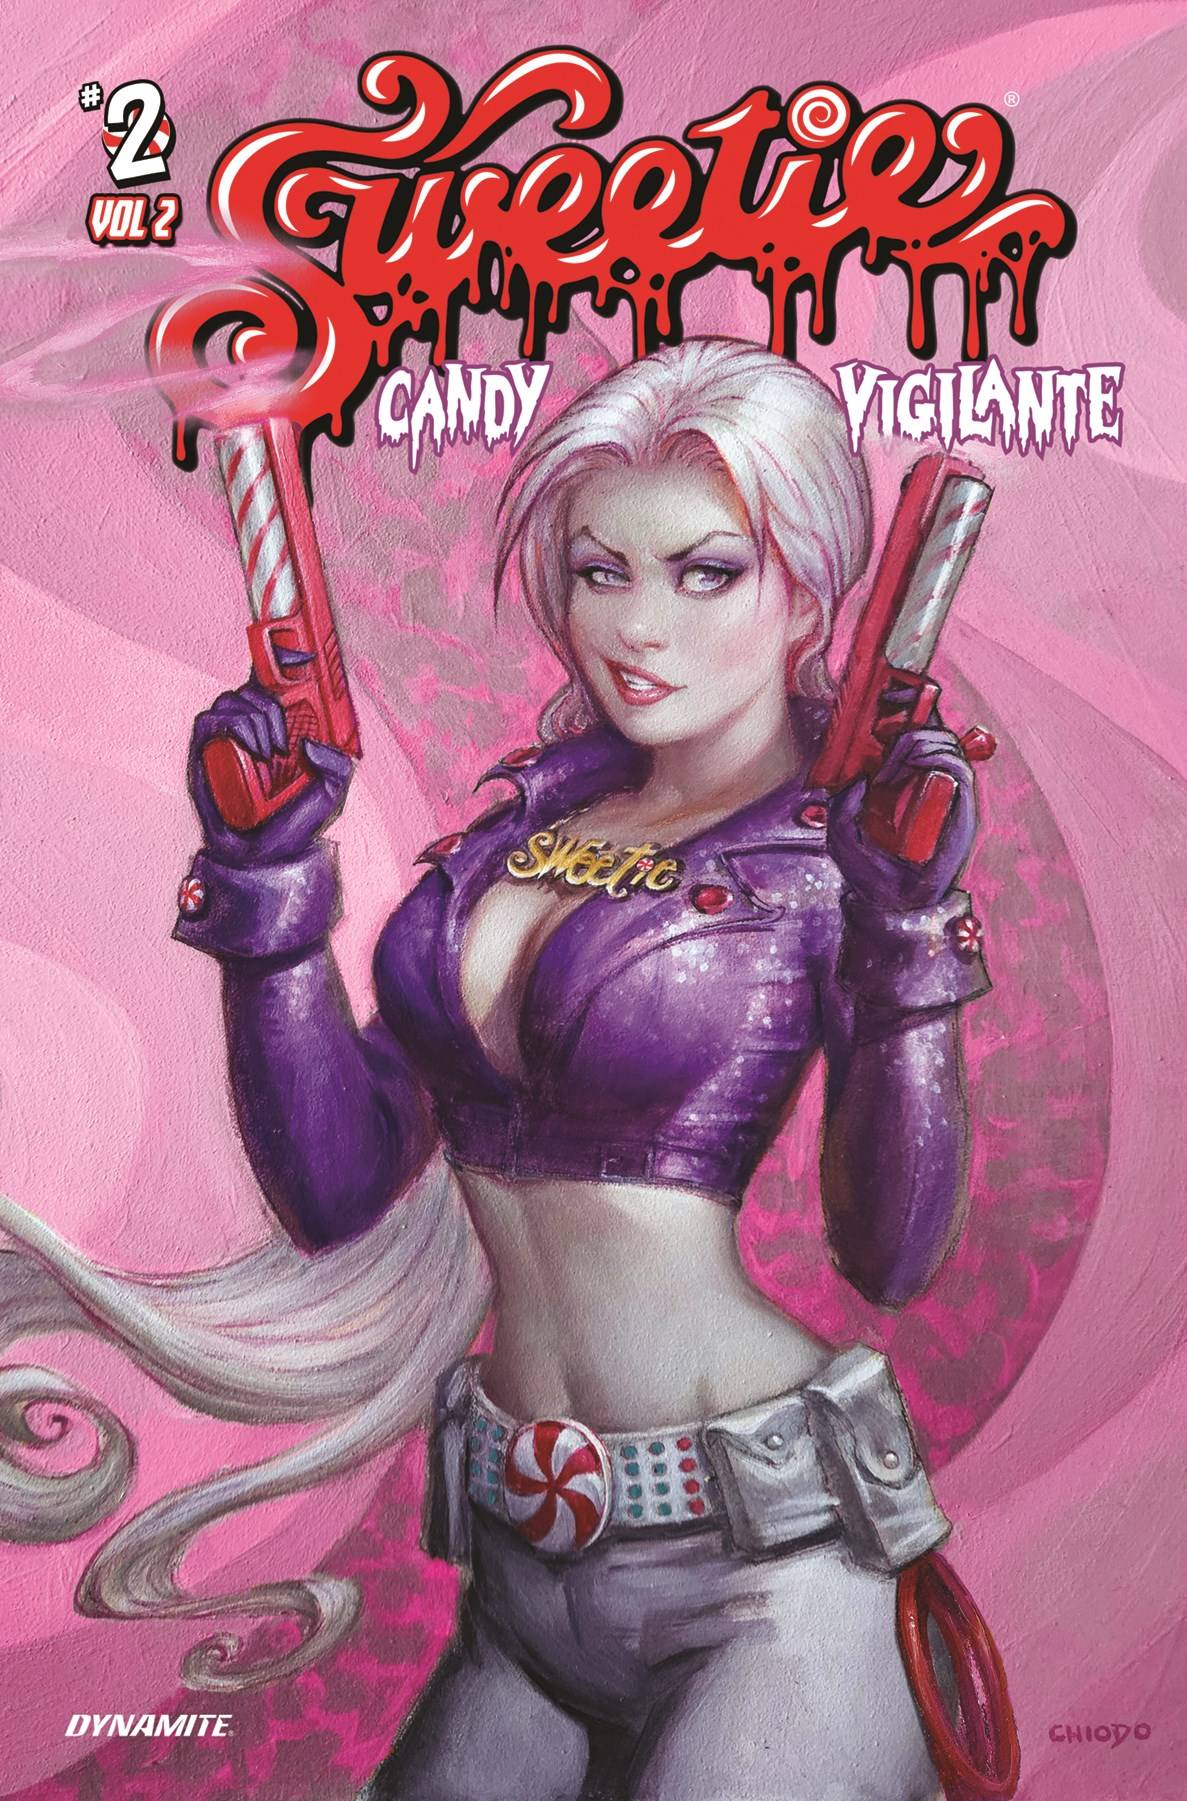 Sweetie Candy Vigilante Volume 2 #2 Cover J Last Call Chiodo Pink (Mature)